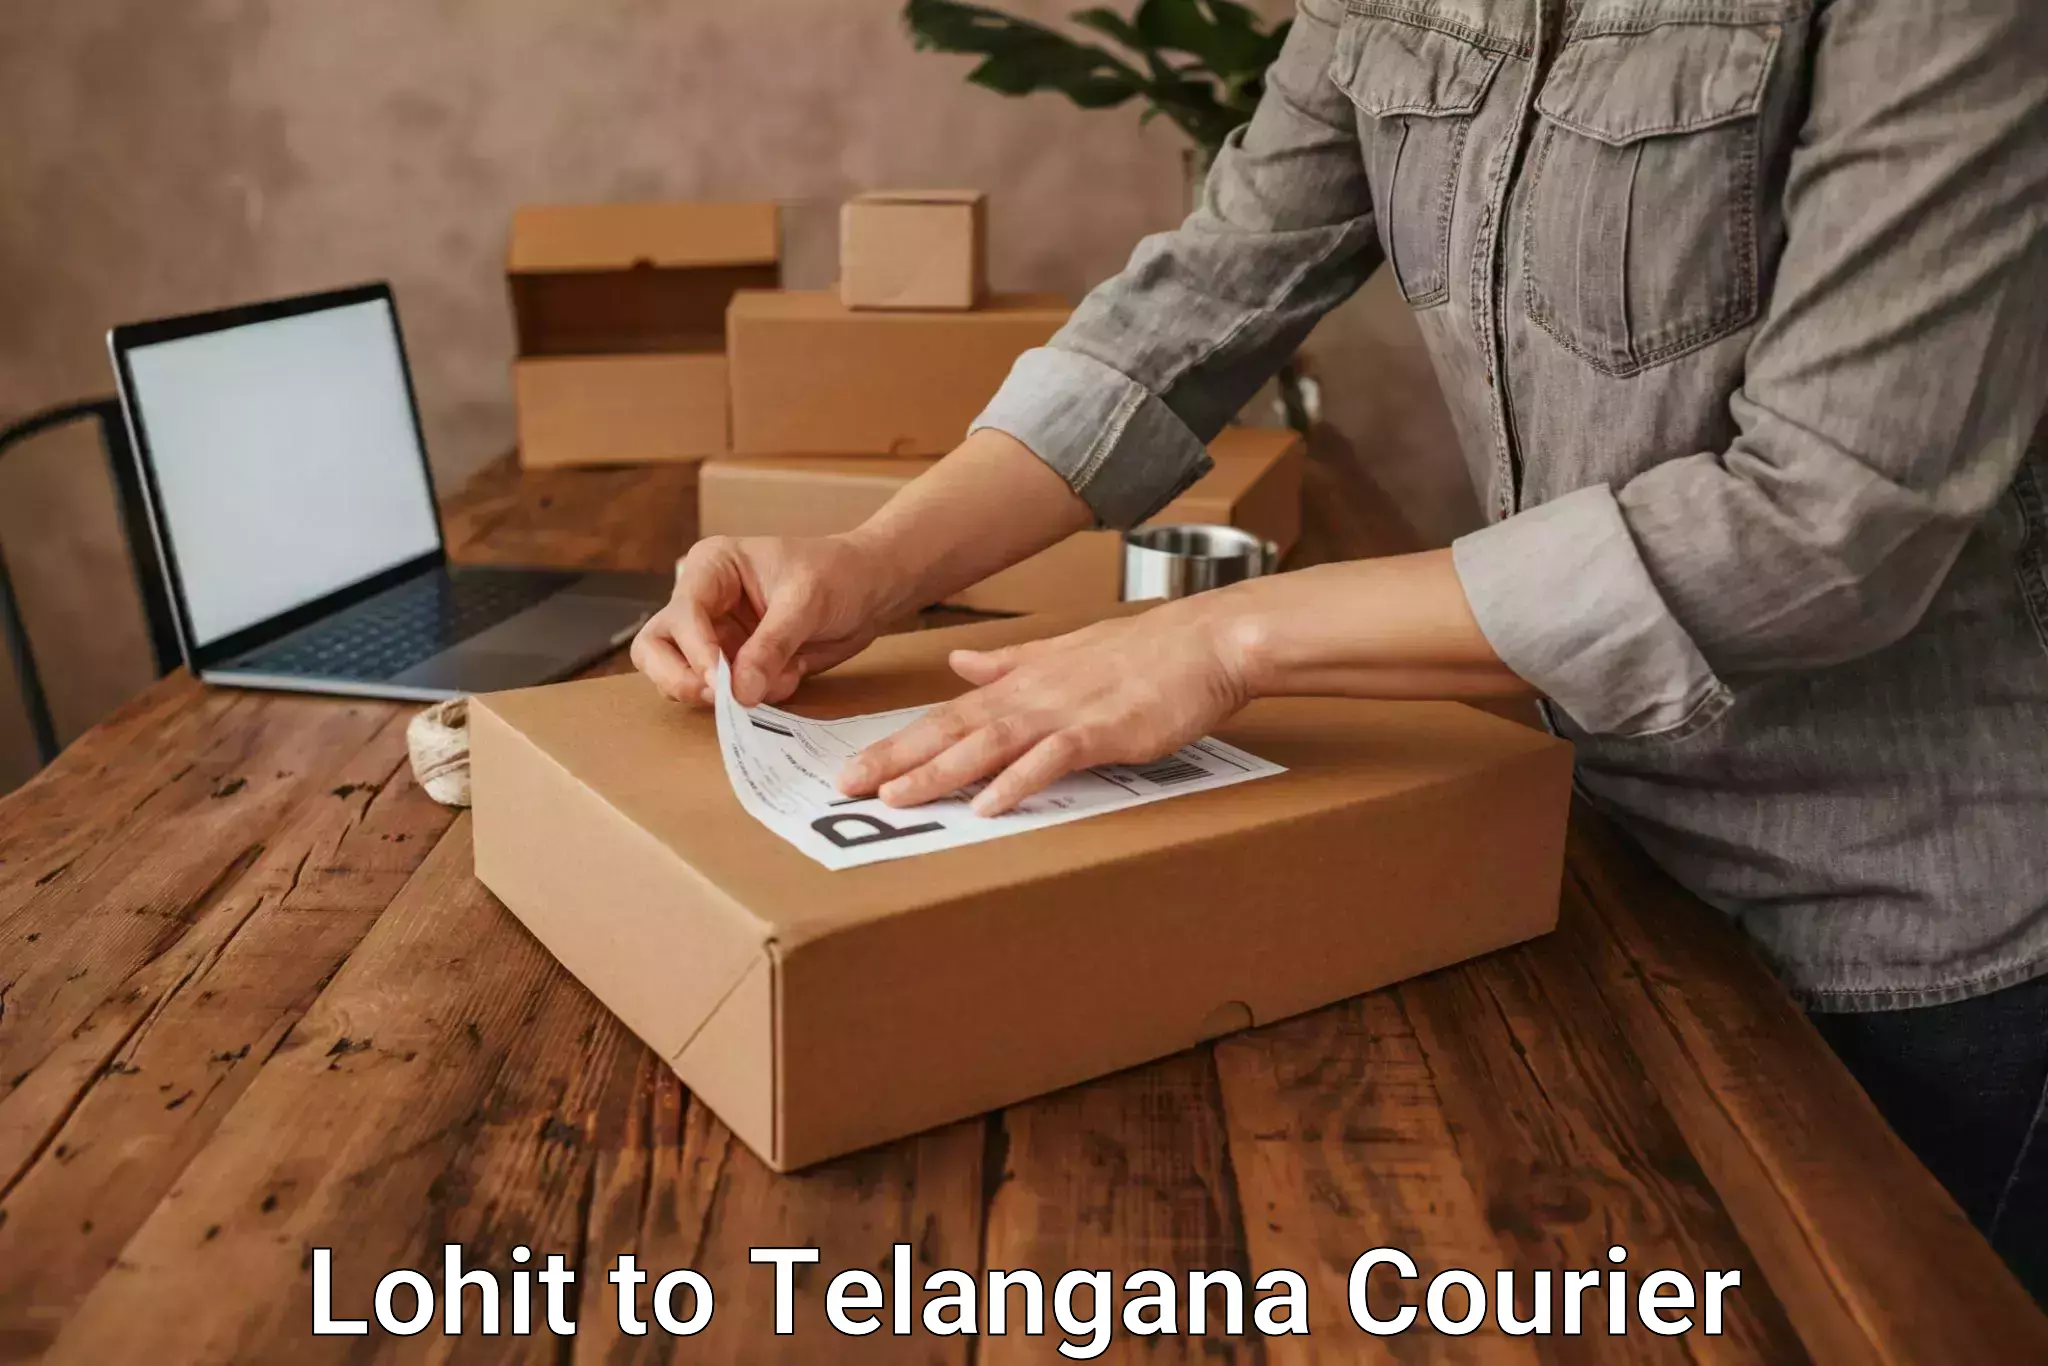 Parcel service for businesses Lohit to Telangana